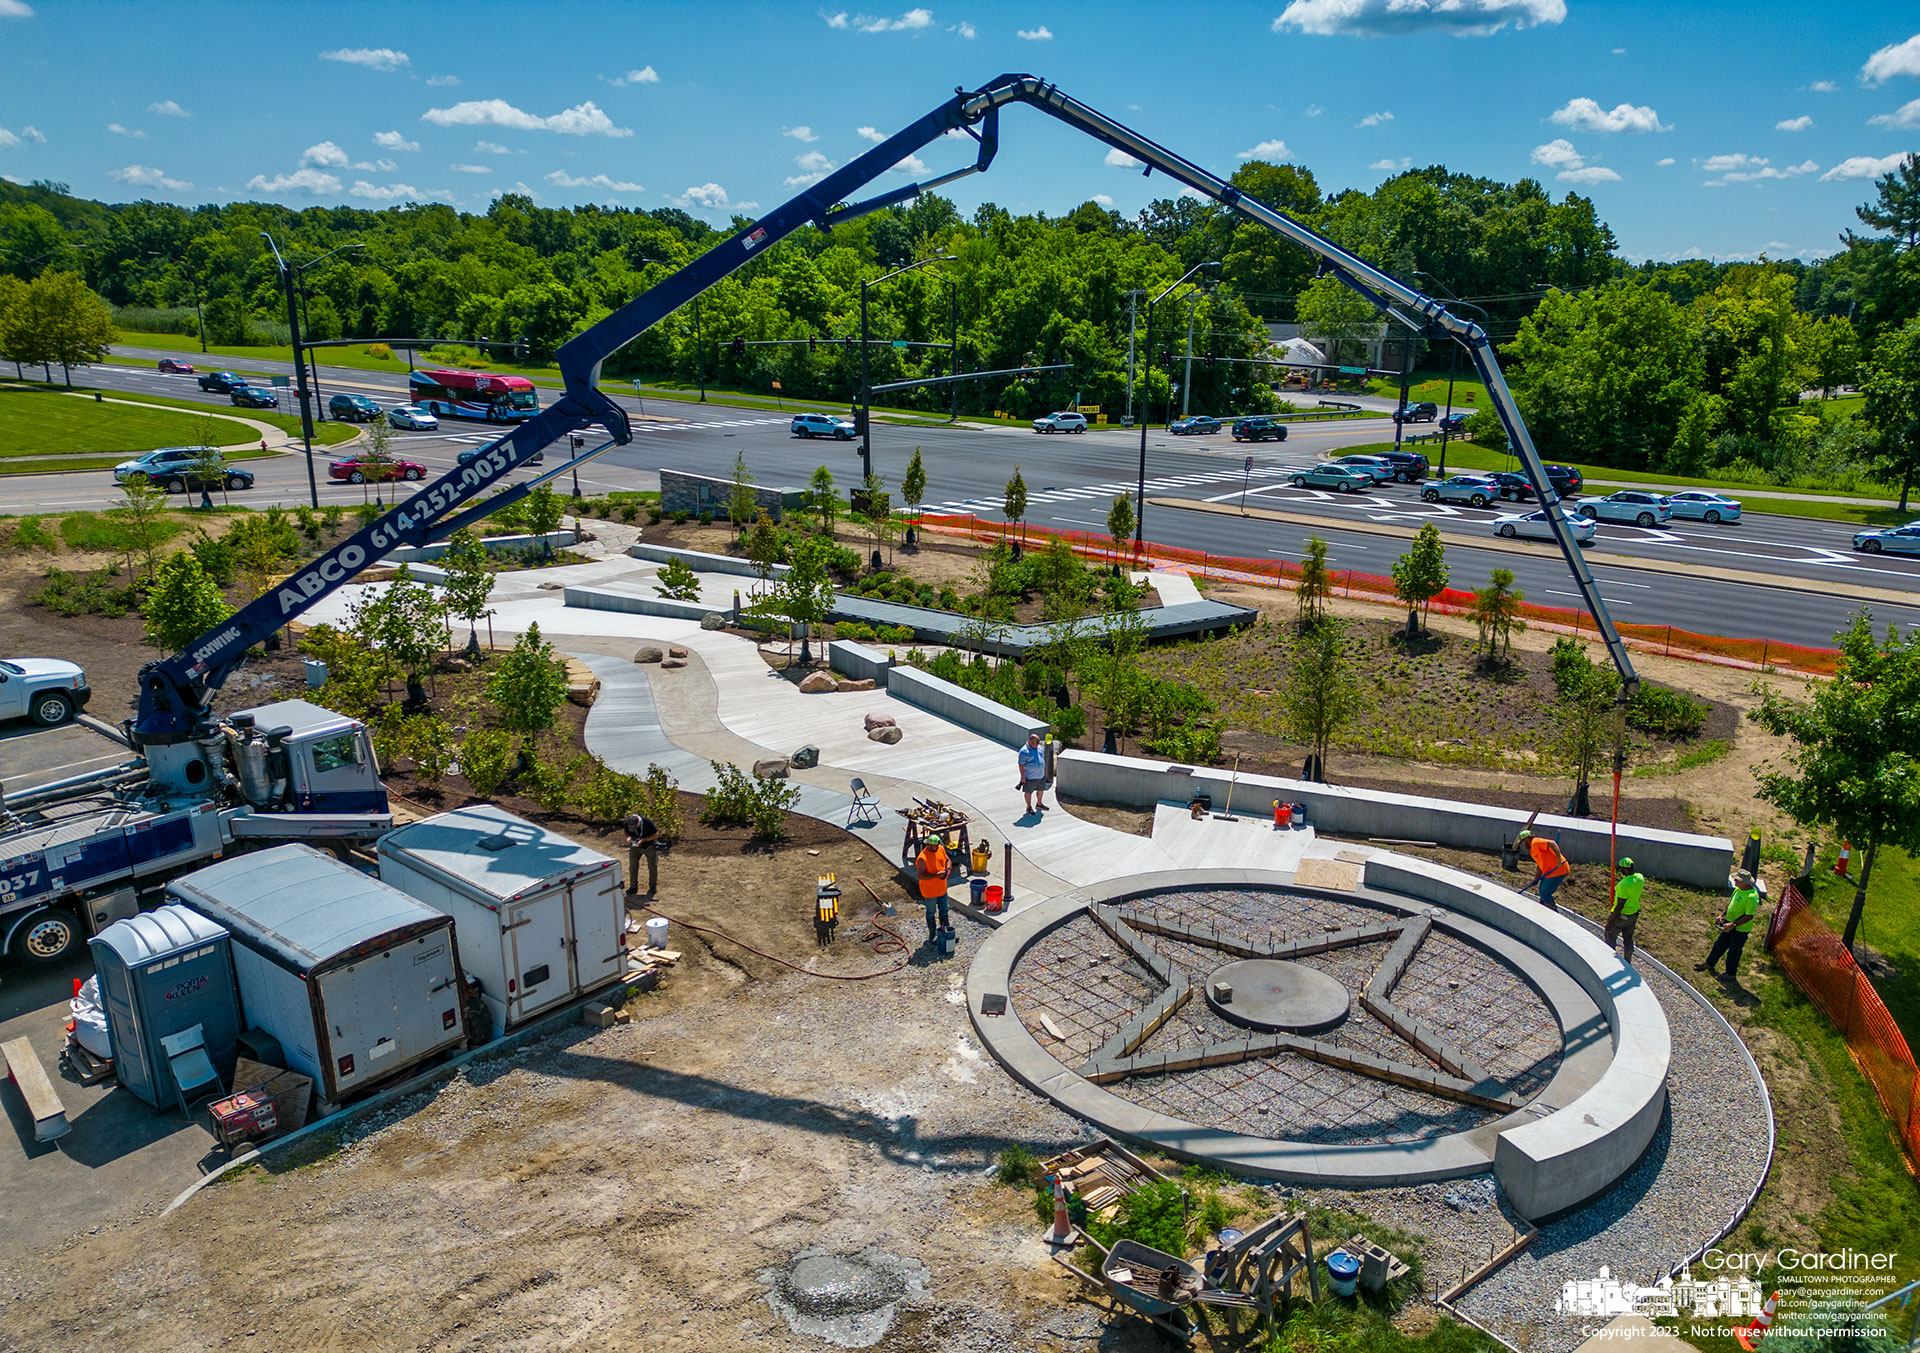 Concrete is pumped into a star outline at the top of the shallow stream that marks one corner of Sycamore Trail Park, built on Africa Road and dedicated to Westerville's history as part of the Underground Railroad. My Final Photo for July 31, 2023.